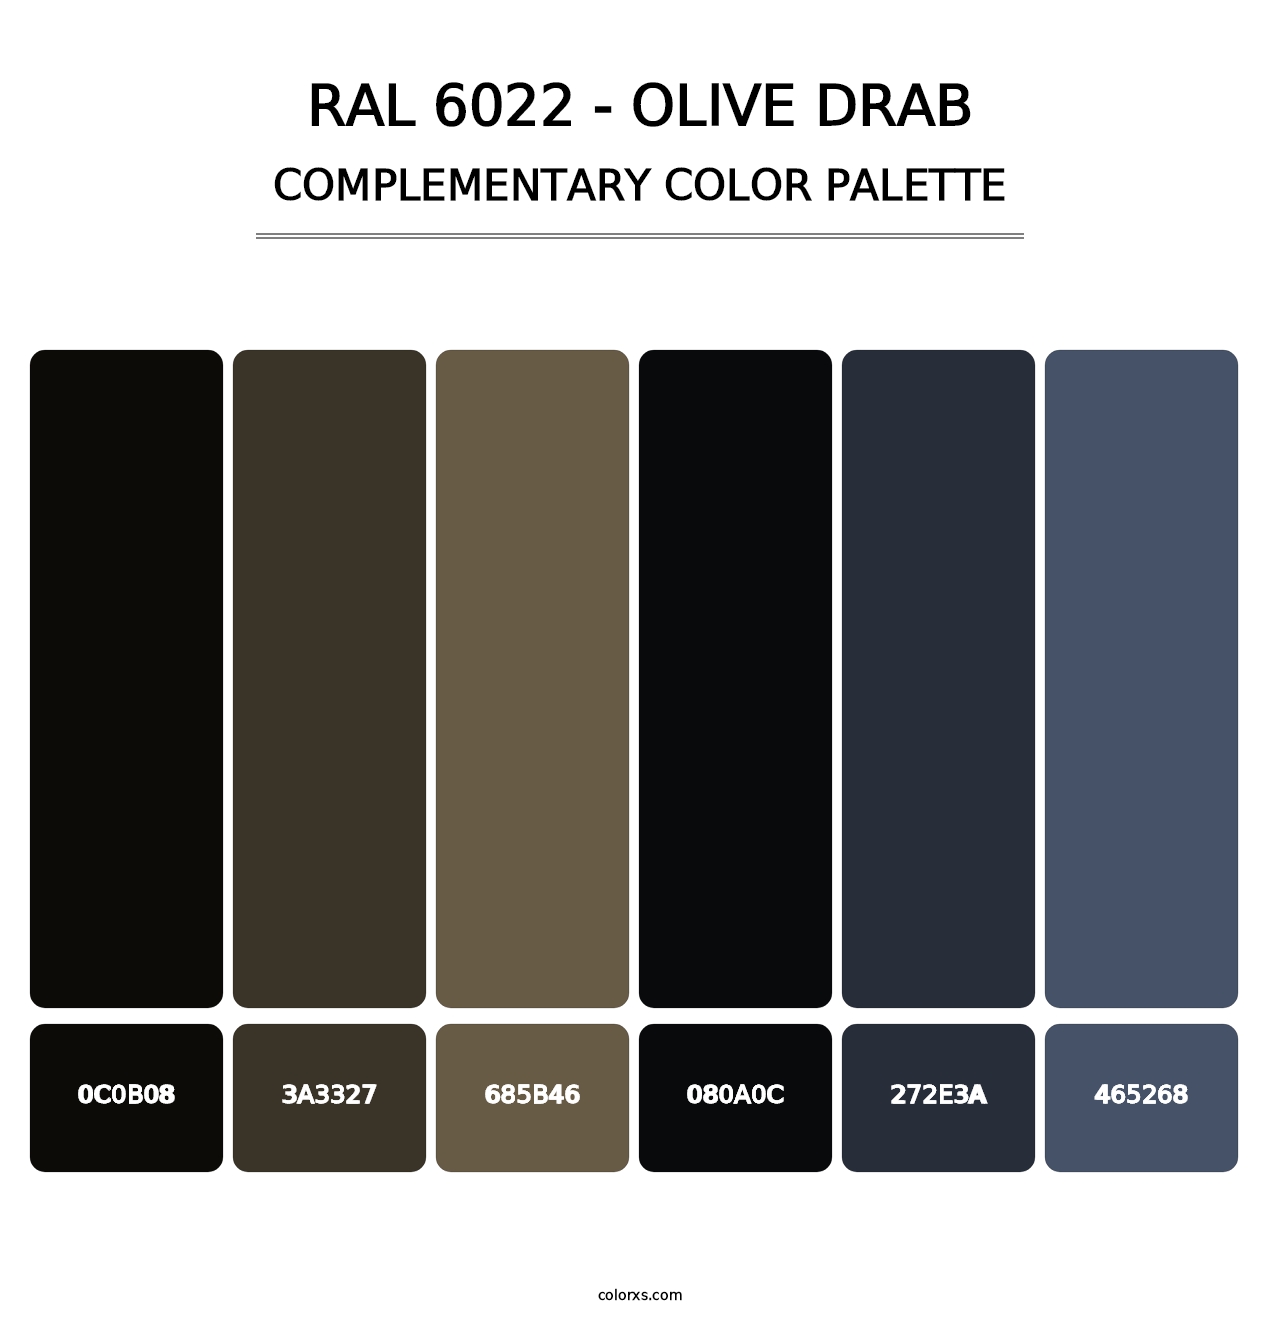 RAL 6022 - Olive Drab - Complementary Color Palette